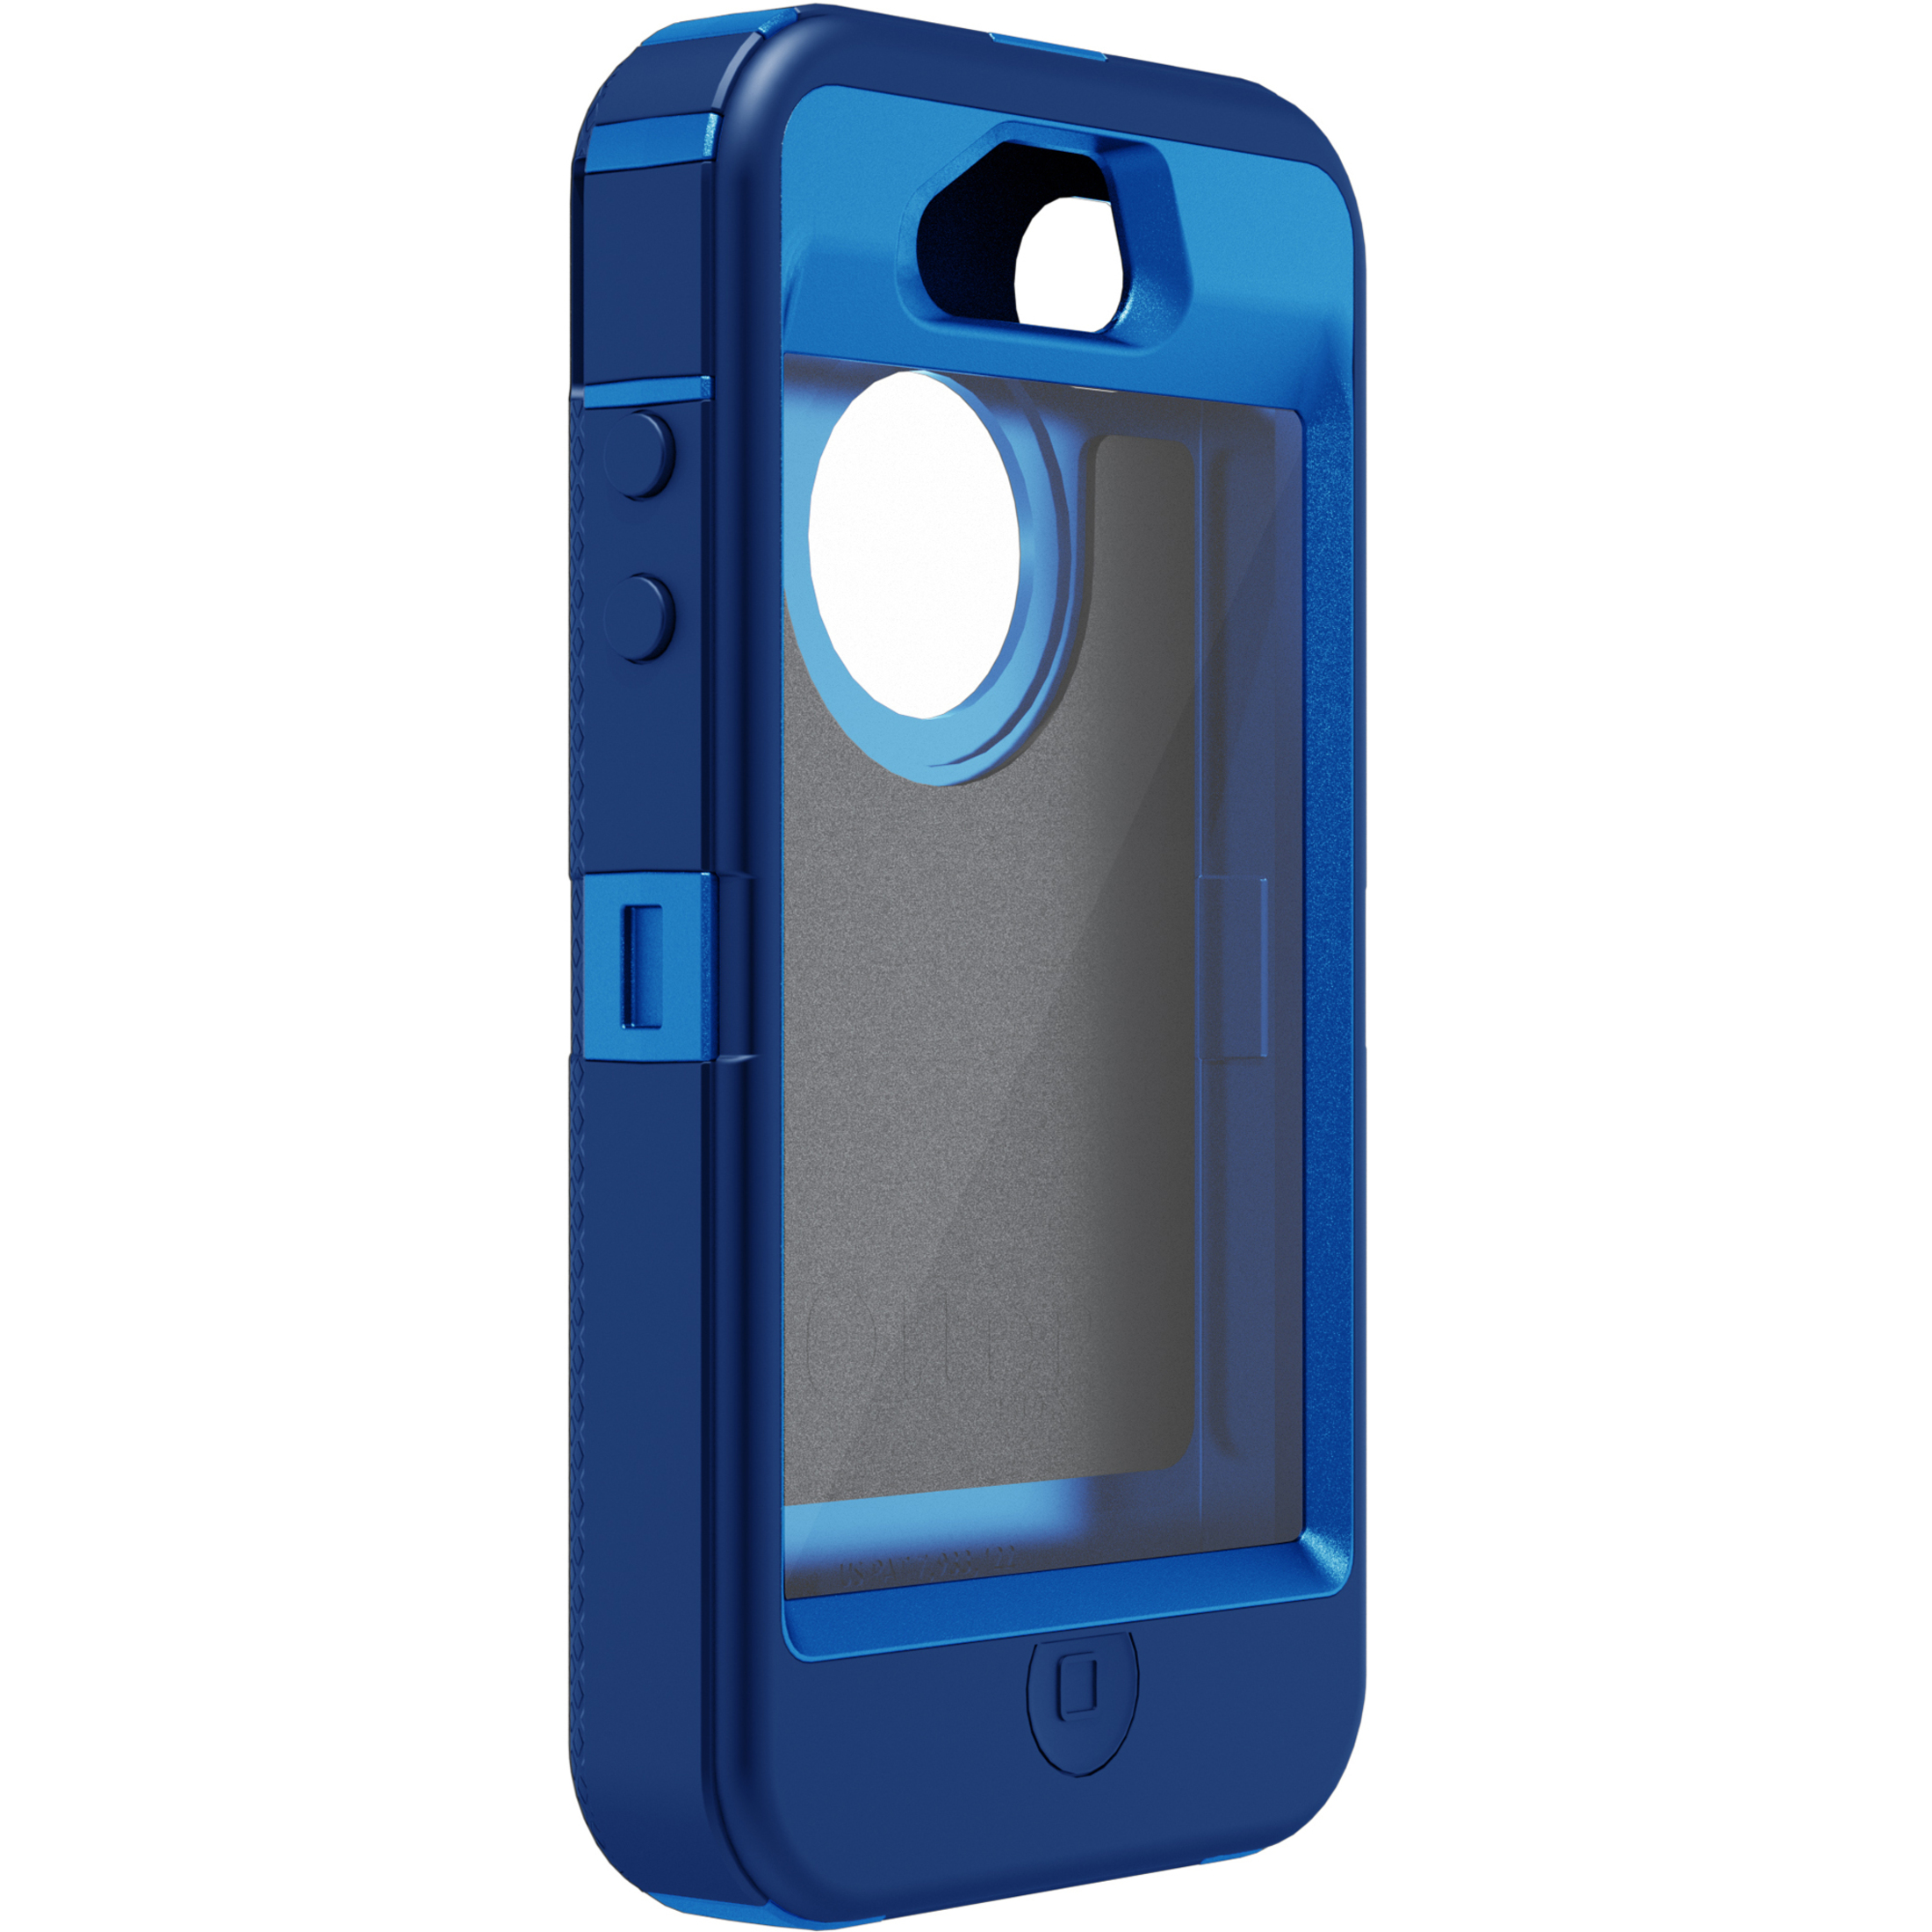 OtterBox Defender Rugged Carrying Case (Holster) Apple iPhone Smartphone, Night Sky - image 5 of 5